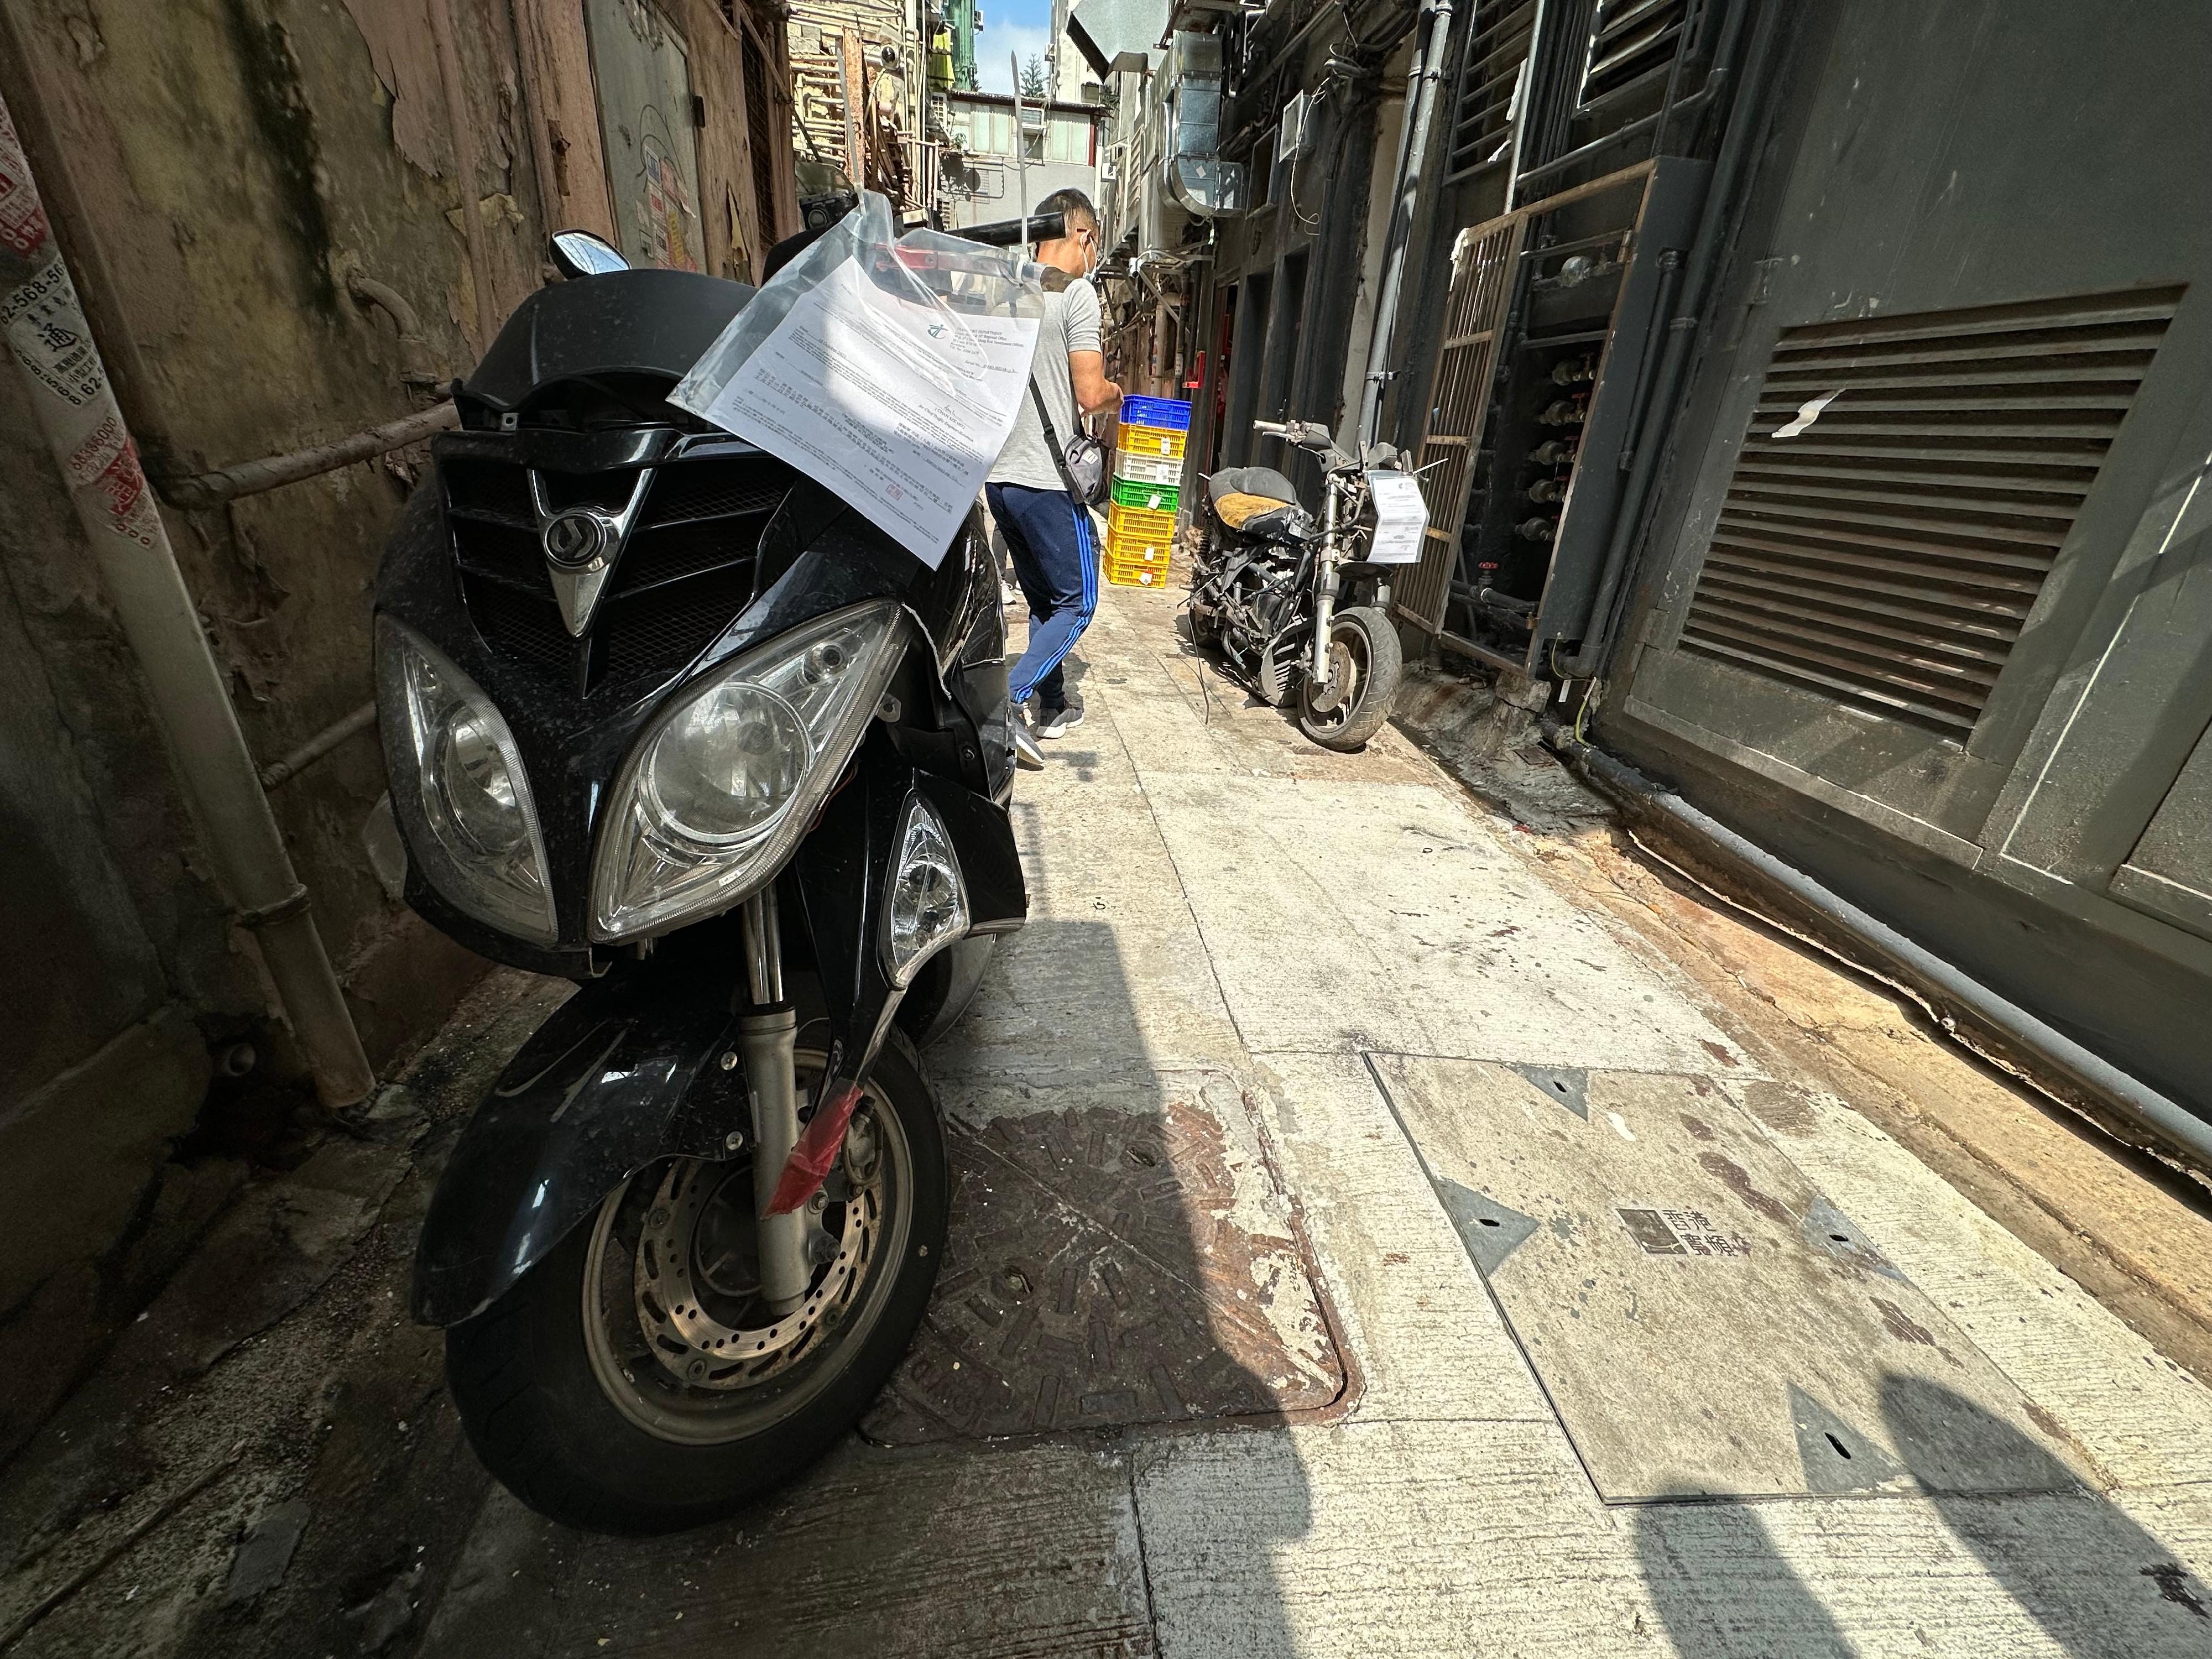 The Home Affairs Department and its District Offices conducted a series of cleaning works, publicity and educational activities during July and October to support the Government Programme on Tackling Hygiene Black Spots launched under the District Matters Co-ordination Task Force. Photo shows a back alley in Sham Shui Po before the joint operation for removal of abandoned vehicles co-ordinated by the Sham Shui Po District Office and relevant departments.